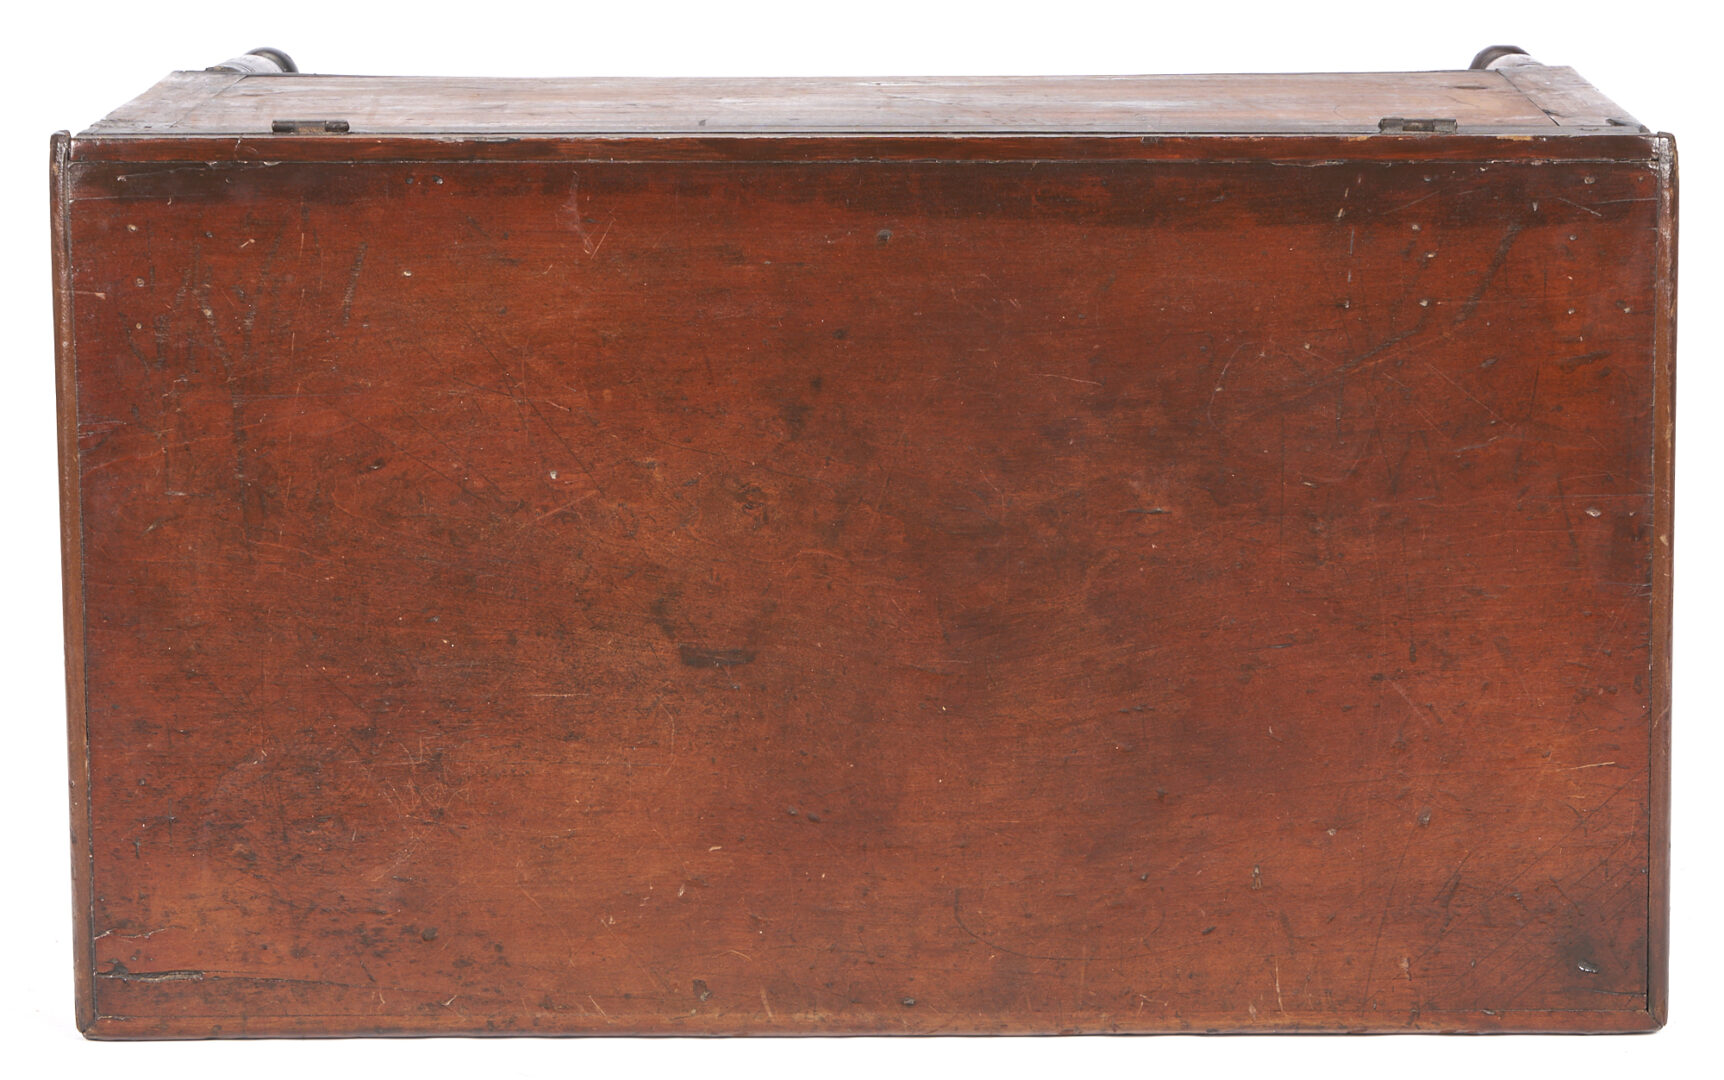 Lot 414: Southern Cherry Sugar Chest, Likely Kentucky